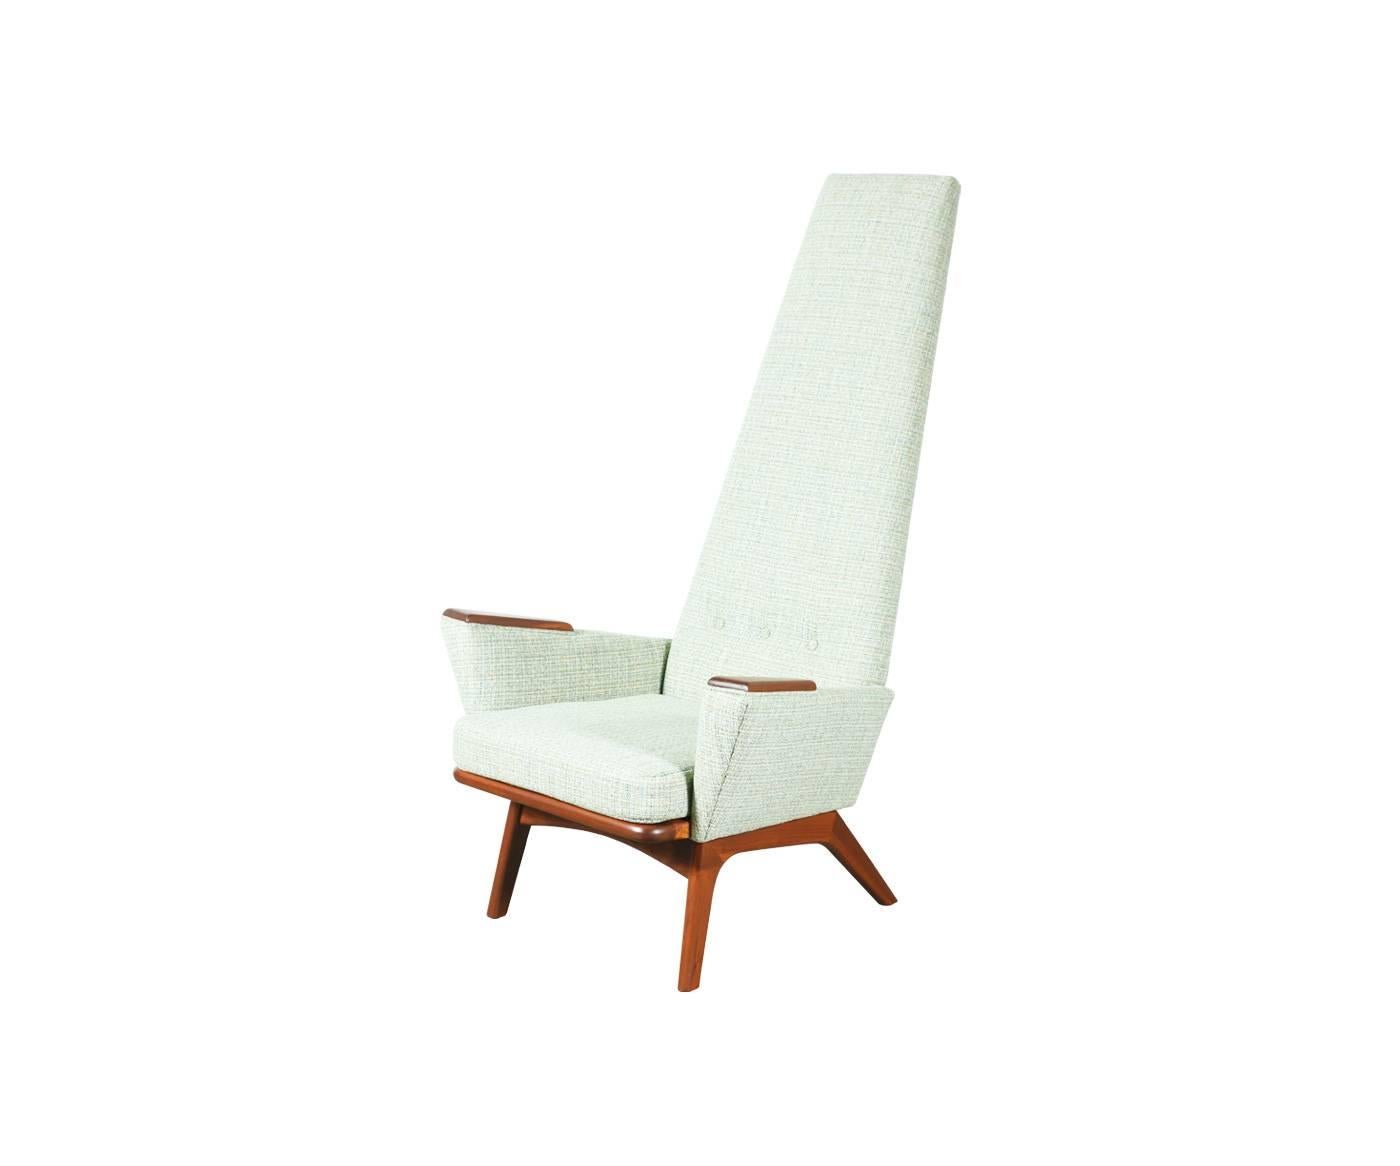 Designer: Adrian Pearsall.
Manufacturer: Craft Associates.
Period/Style: Mid-Century Modern.
Country: United States.
Date: 1960s.

Dimensions: 55″ H x 35″ W x 31.5″ D.
Seat height 16″.
Materials: Walnut, cotton tweed.
Condition: Excellent,